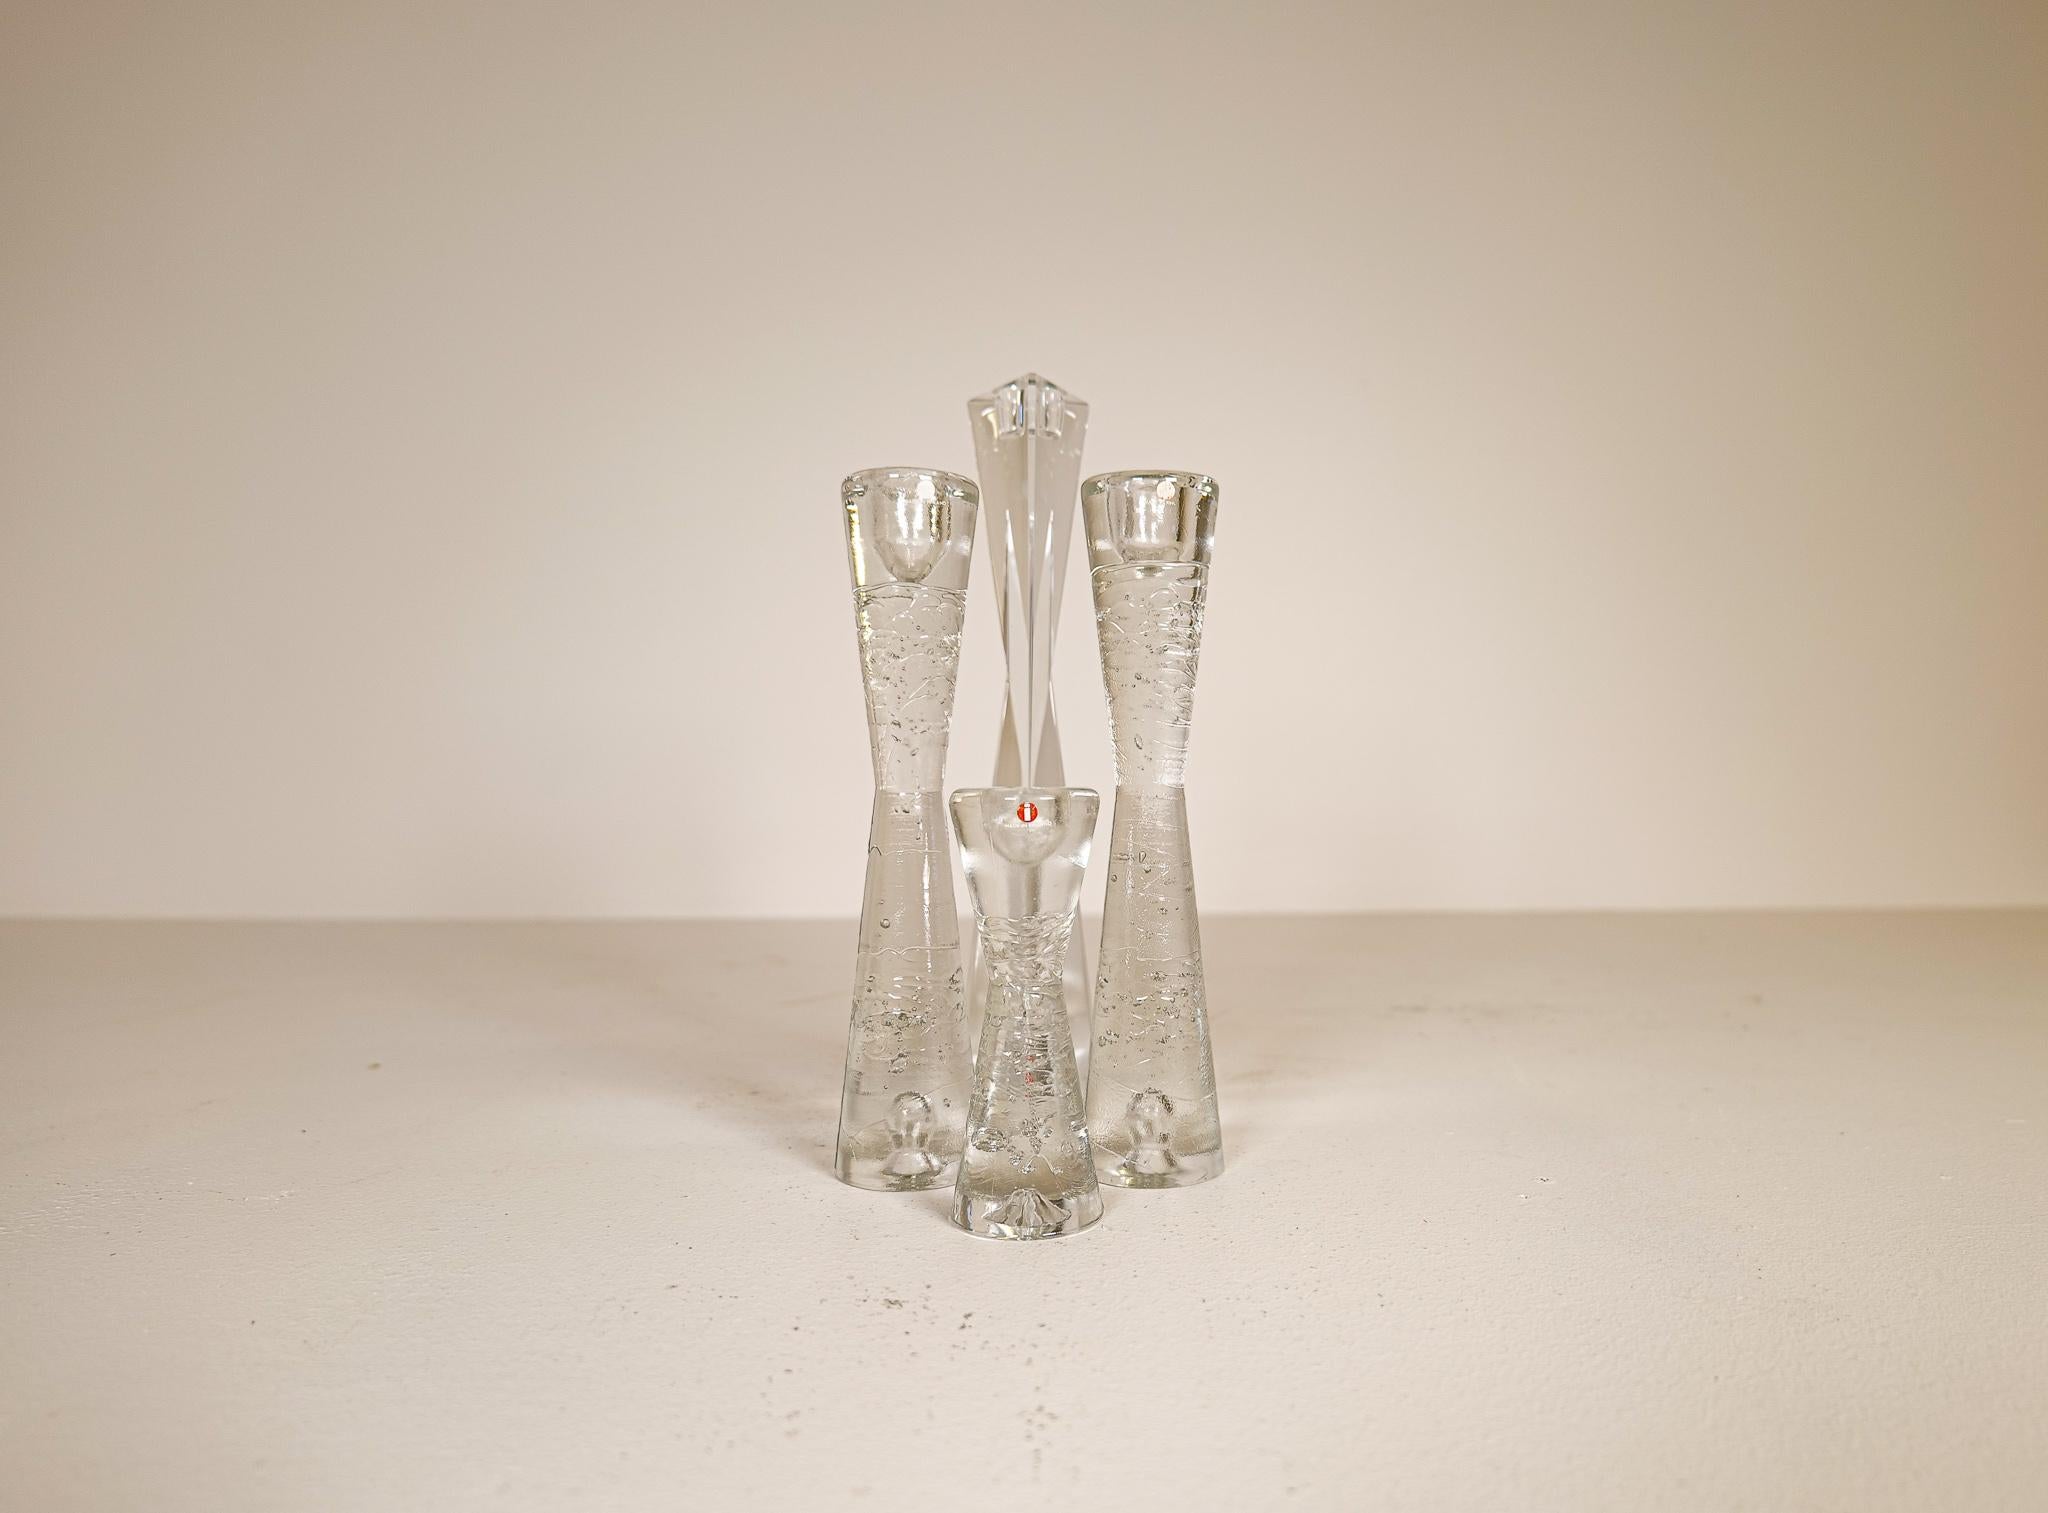 Group of 4 Iittala Arkipelago candlesticks in time glass high forms.
Architectural cast clear glass blocks.
 three of them with bubbles and one clear glass with more edge. They are created to appear as if they were blocks. They are designed by